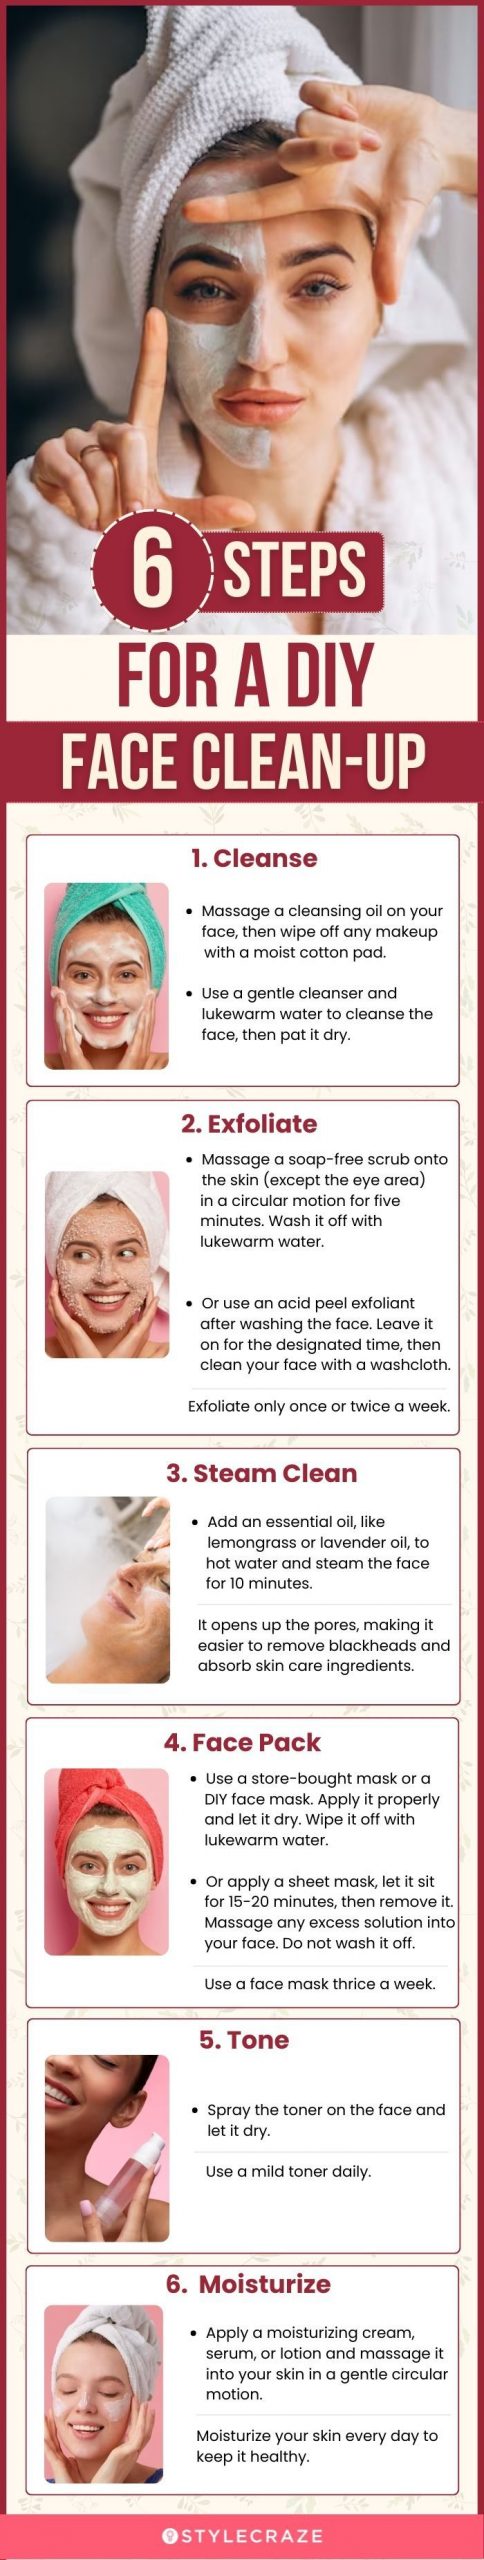 6 steps for a diy face clean up(infographic)